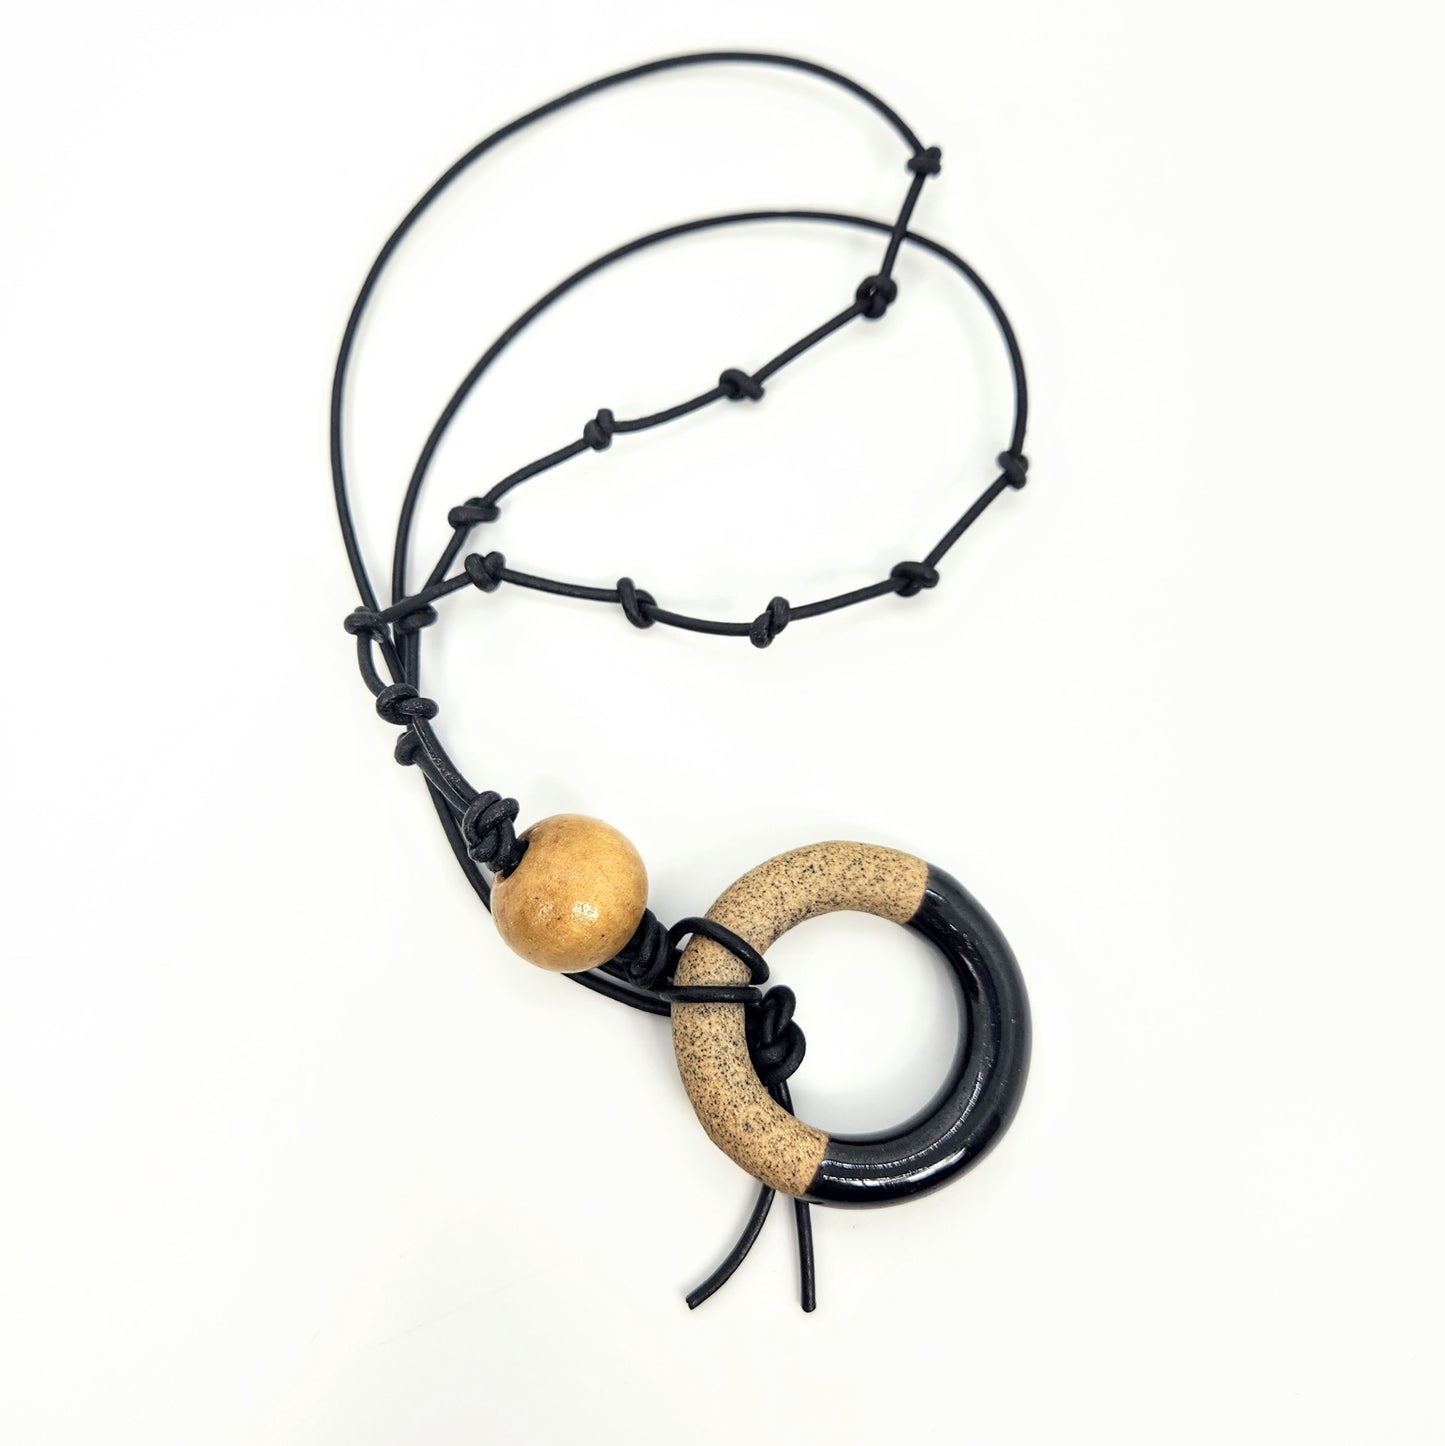 Porcelain Dipped Circle + Leather Necklace